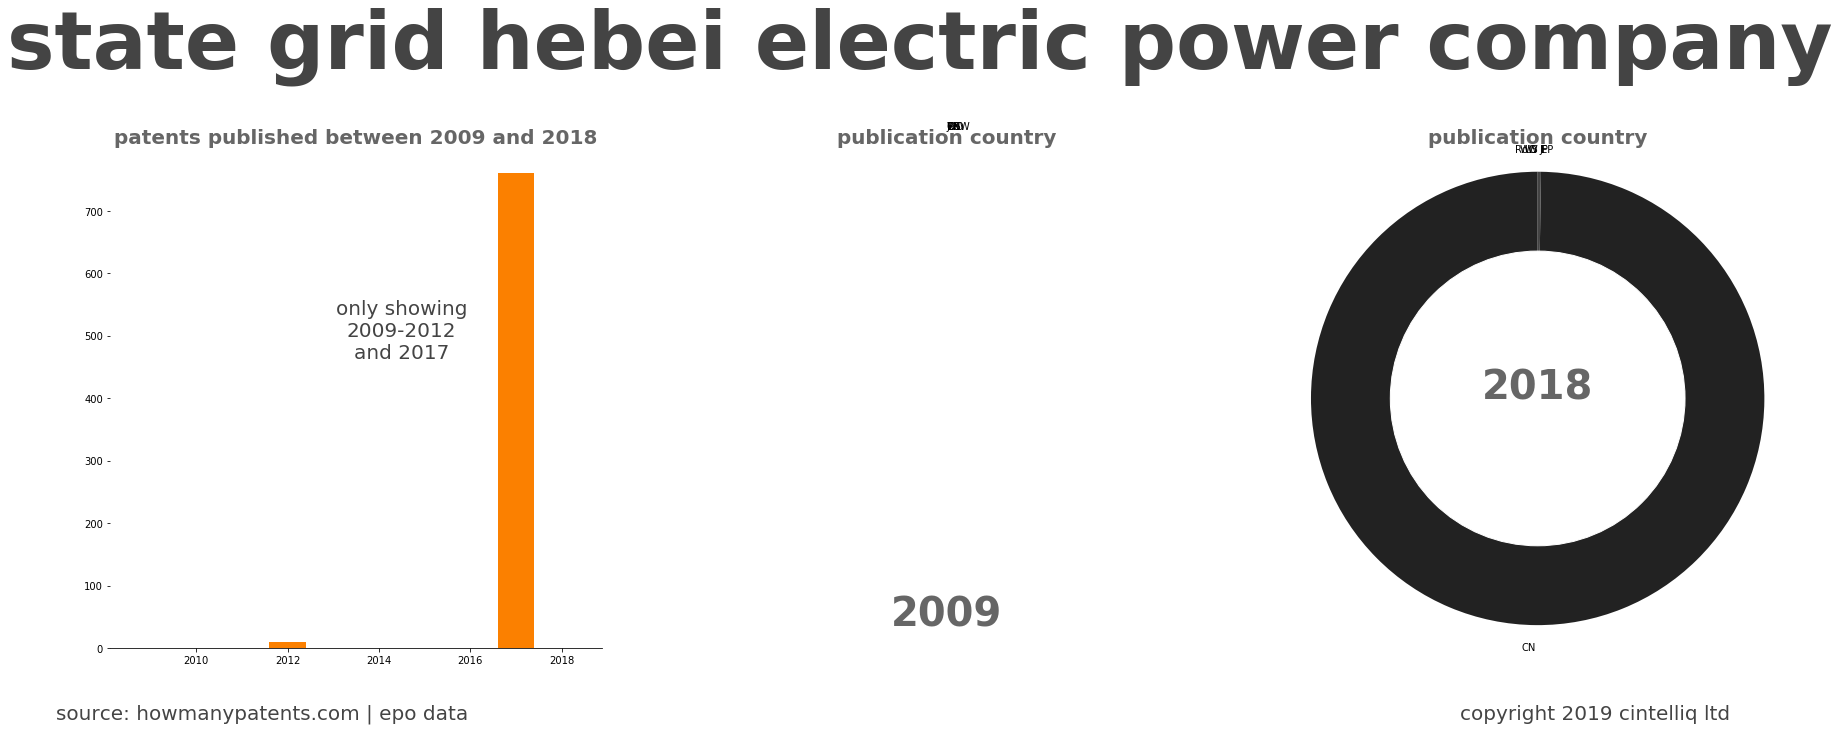 summary of patents for State Grid Hebei Electric Power Company